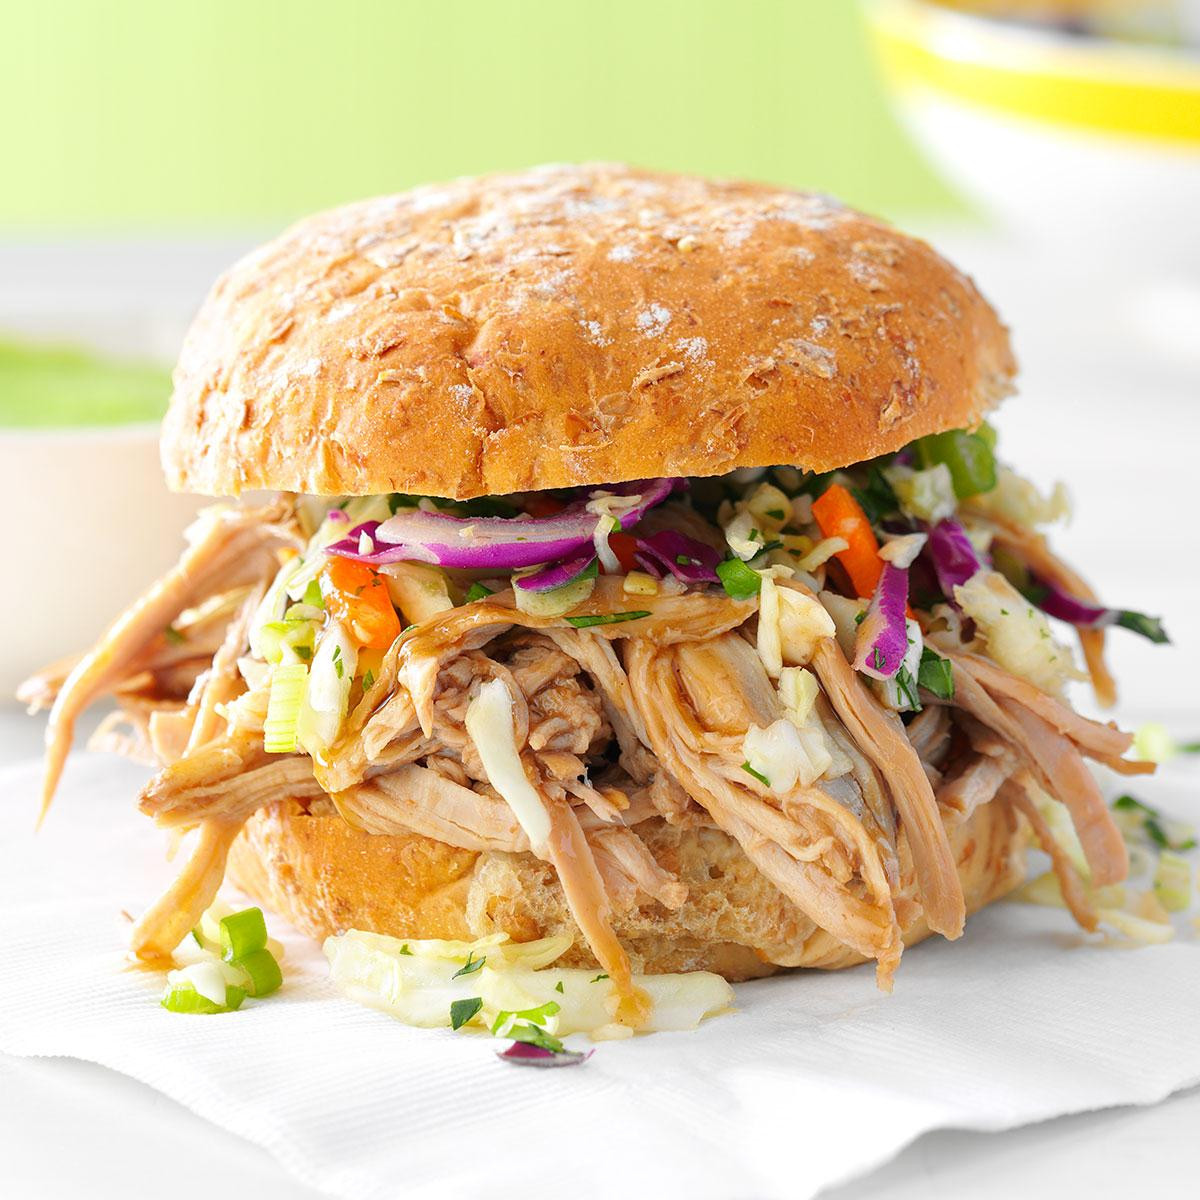 Healthy Side Dishes For Sandwiches
 Sesame Pulled Pork Sandwiches Recipe